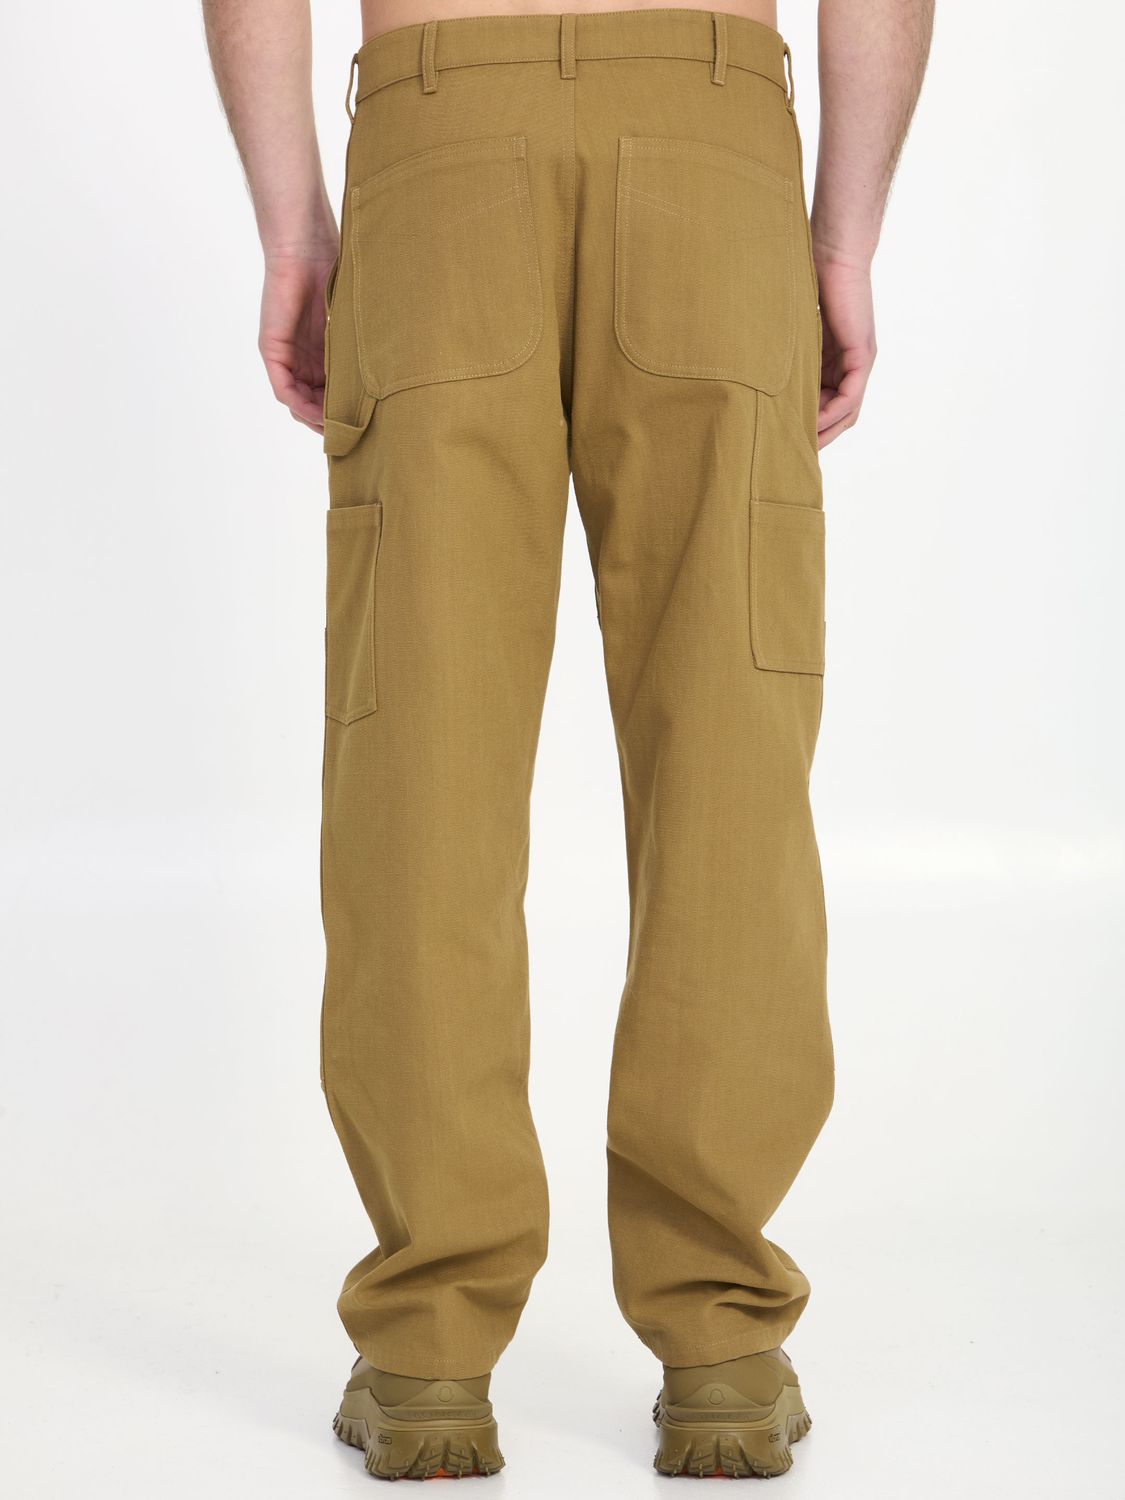 MONCLER X ROC NATION BY JAY Z Men's Beige Cotton Canvas Trousers with Embroidered Logo and Multiple Pockets